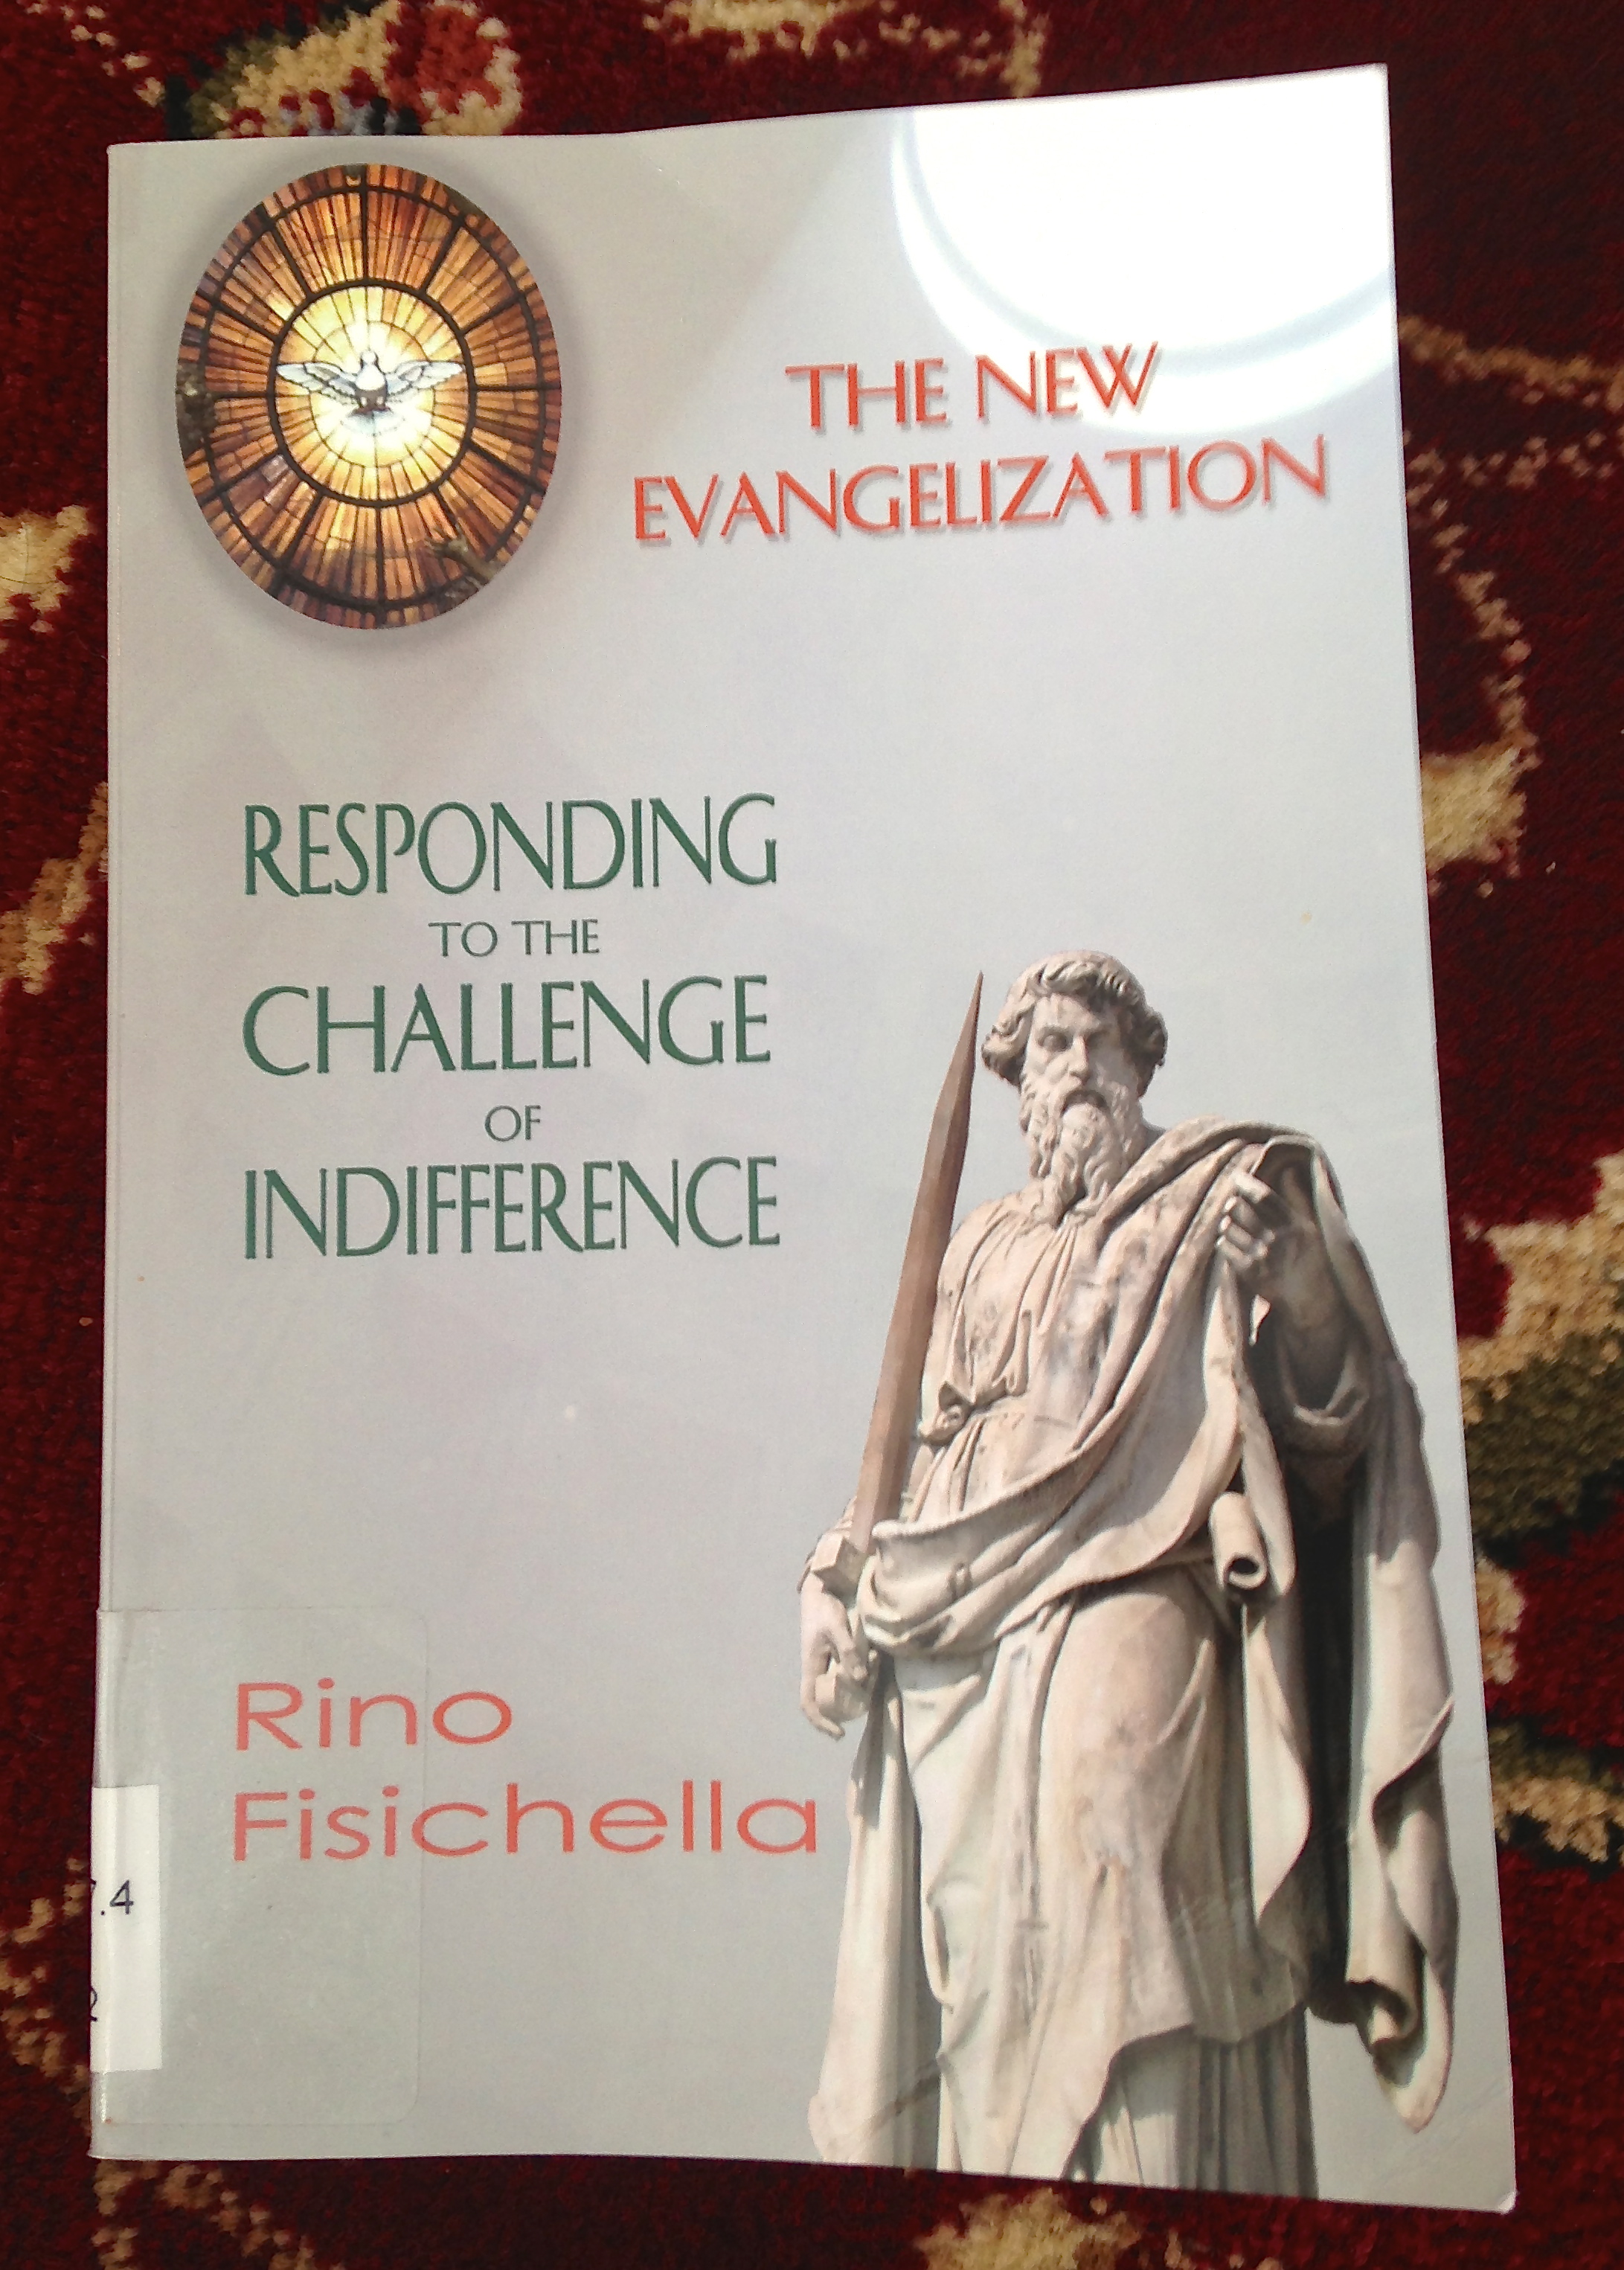 The New Evangelization. Responding to the challenge of indifference Rino Fisichella